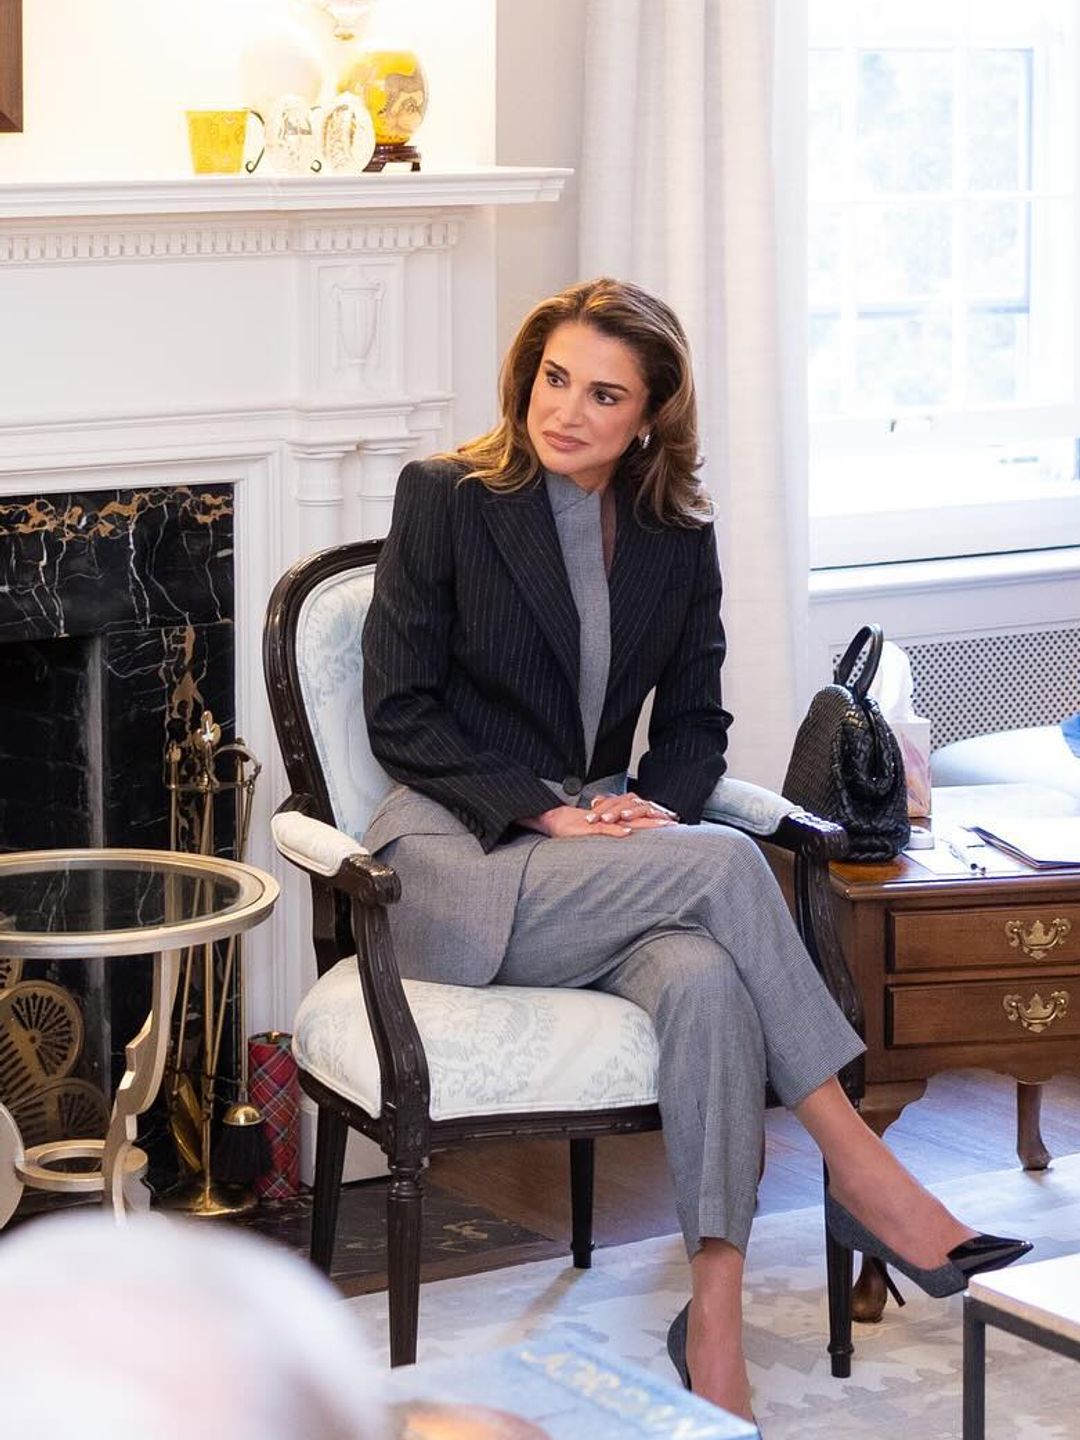 Queen Rania wears an Alexander McQueen suit to sit in on a business meeting in the USA